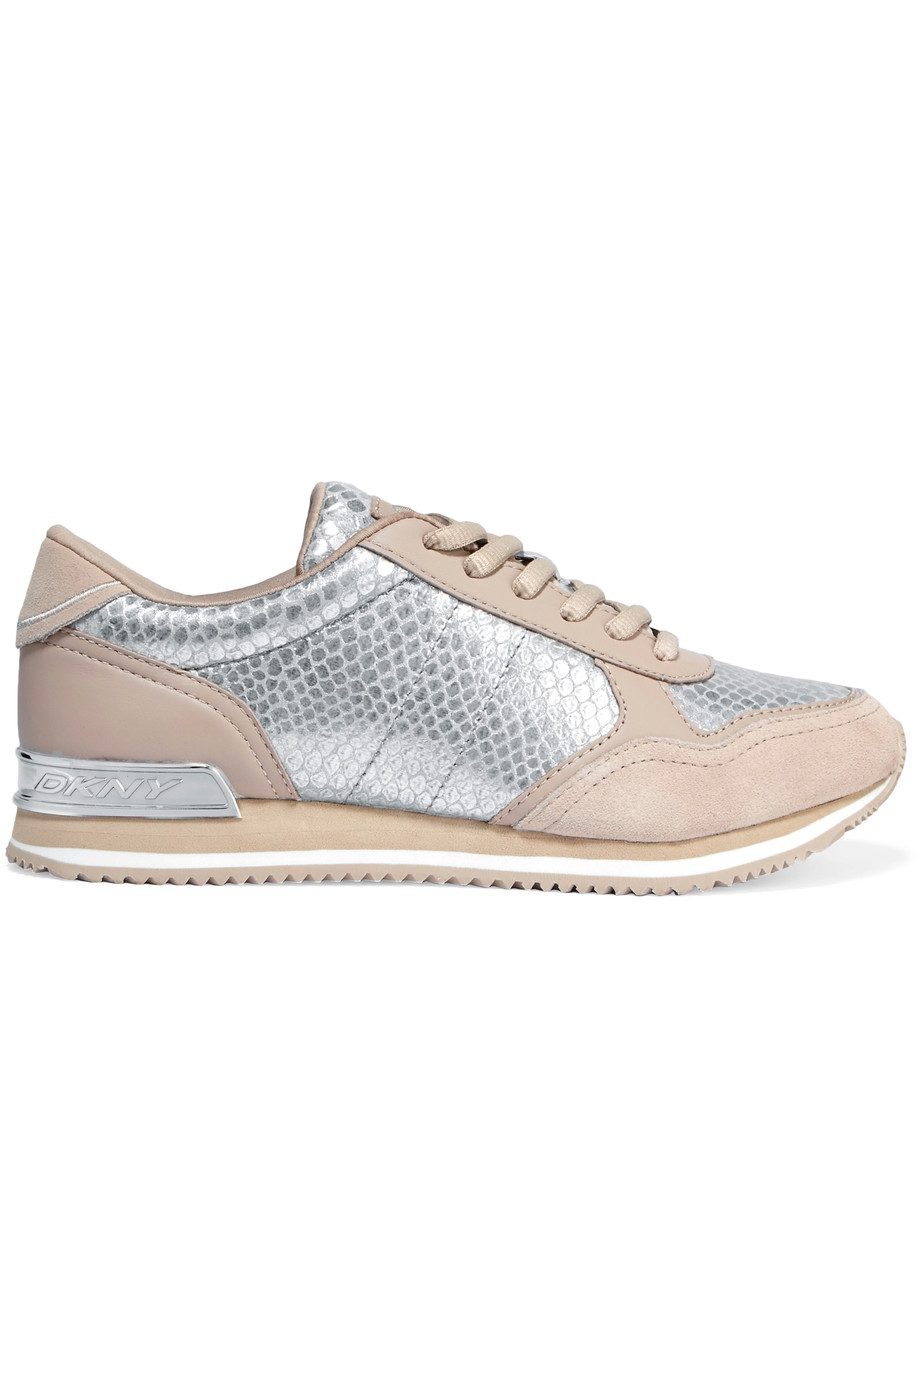 Dkny Jamie Metallic Snake-effect Leather And Suede Sneakers | ModeSens